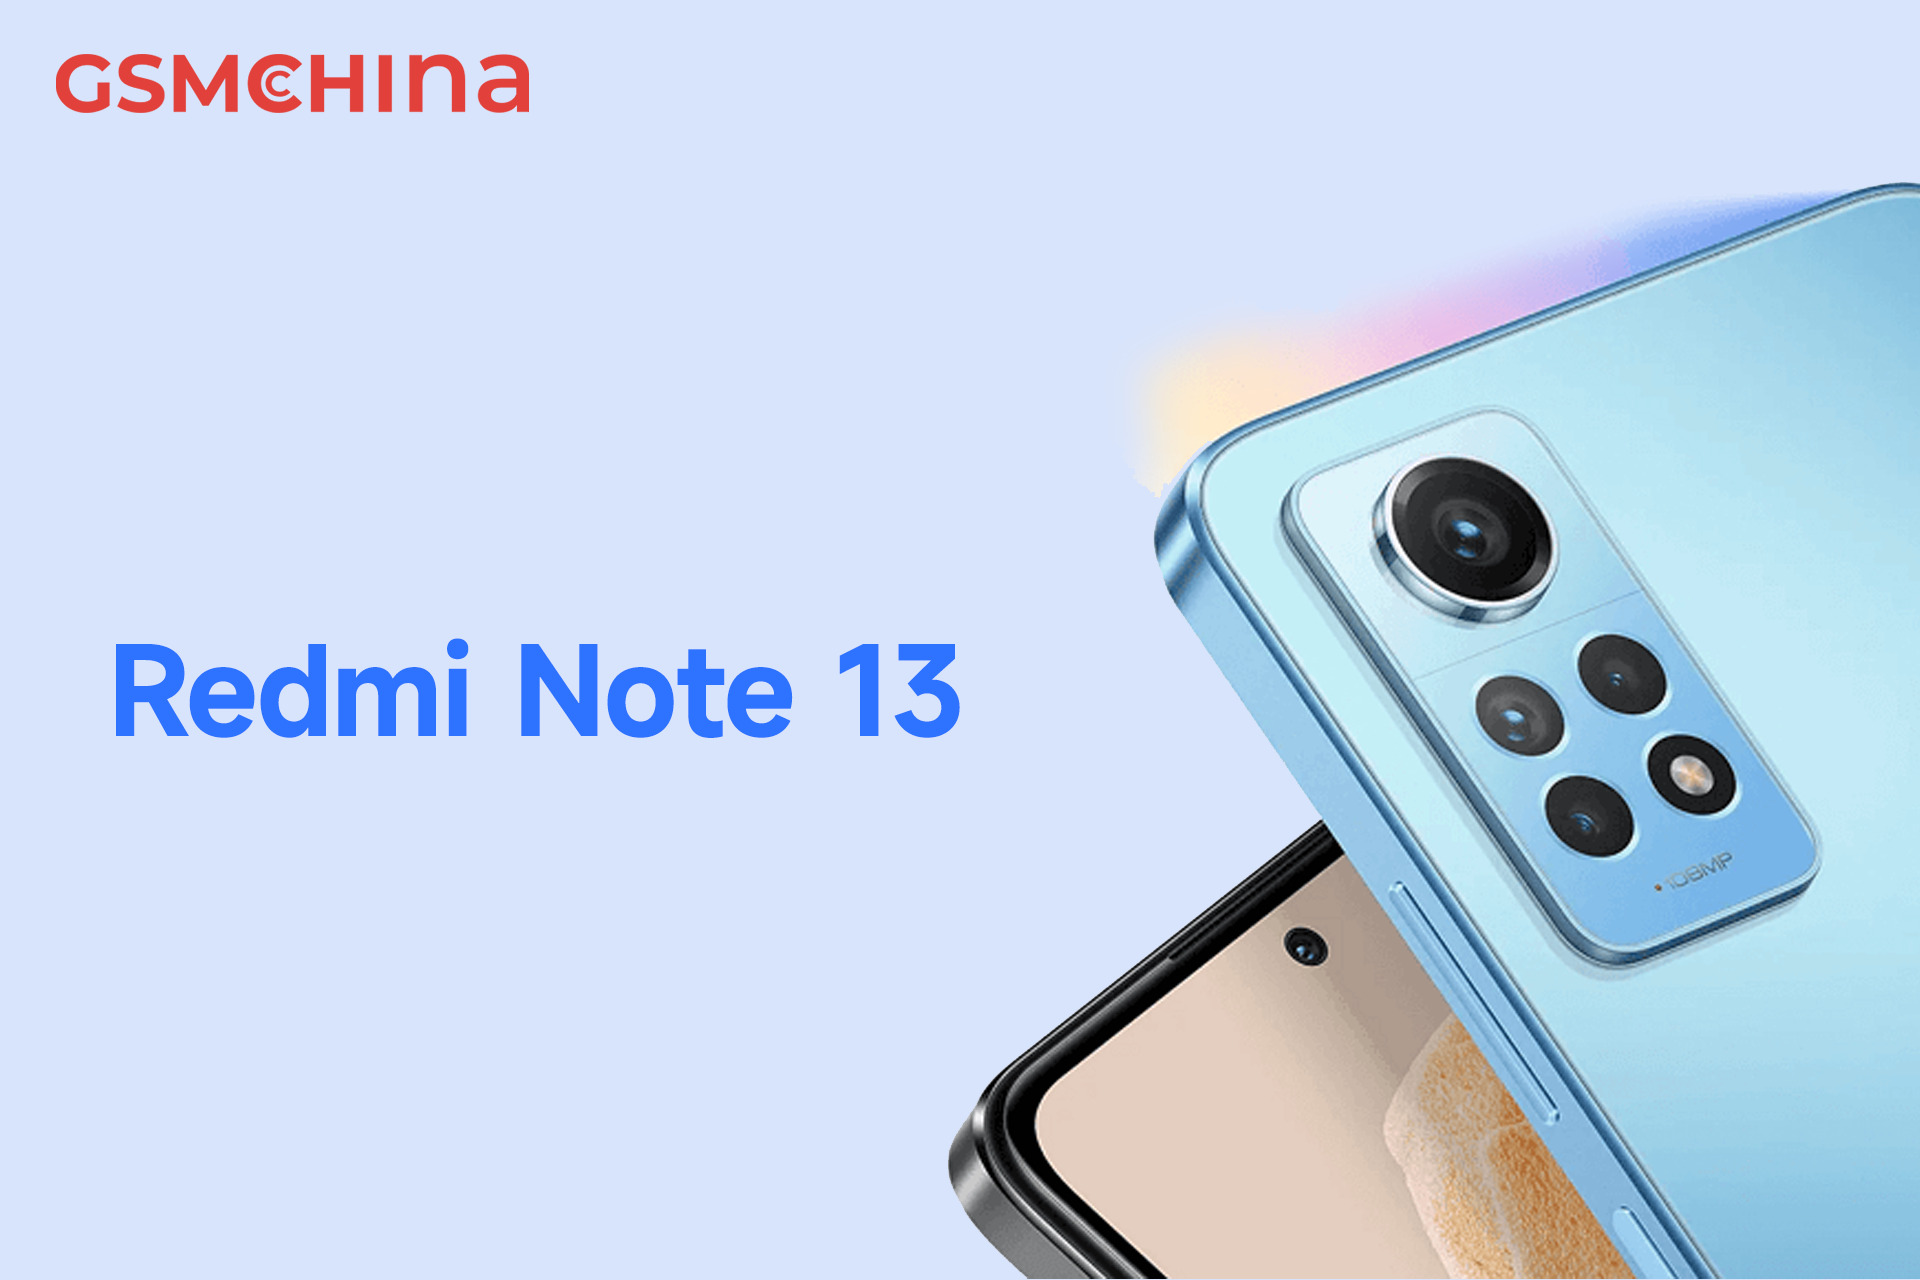 https://9554770e.rocketcdn.me/wp-content/uploads/2023/10/Redmi-Note-13-4G-model-caught-in-the-IMEI-database-so-what-does-it-offer.jpg